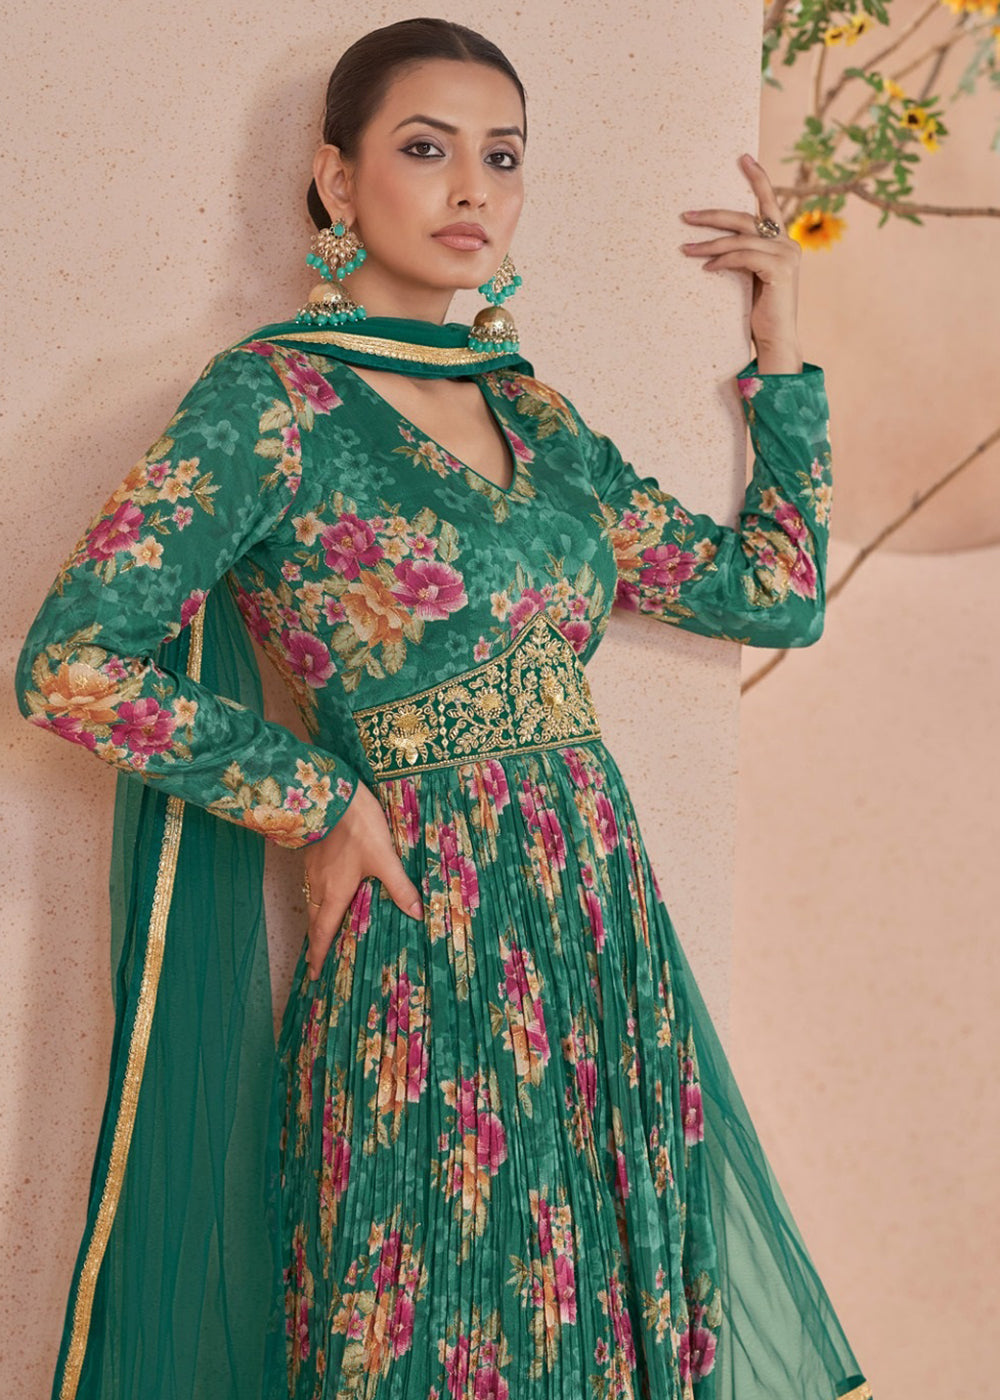 Buy Now Digital Printed Green Embroidered Wedding Anarkali Gown Online in USA, UK, Australia, New Zealand, Canada & Worldwide at Empress Clothing.